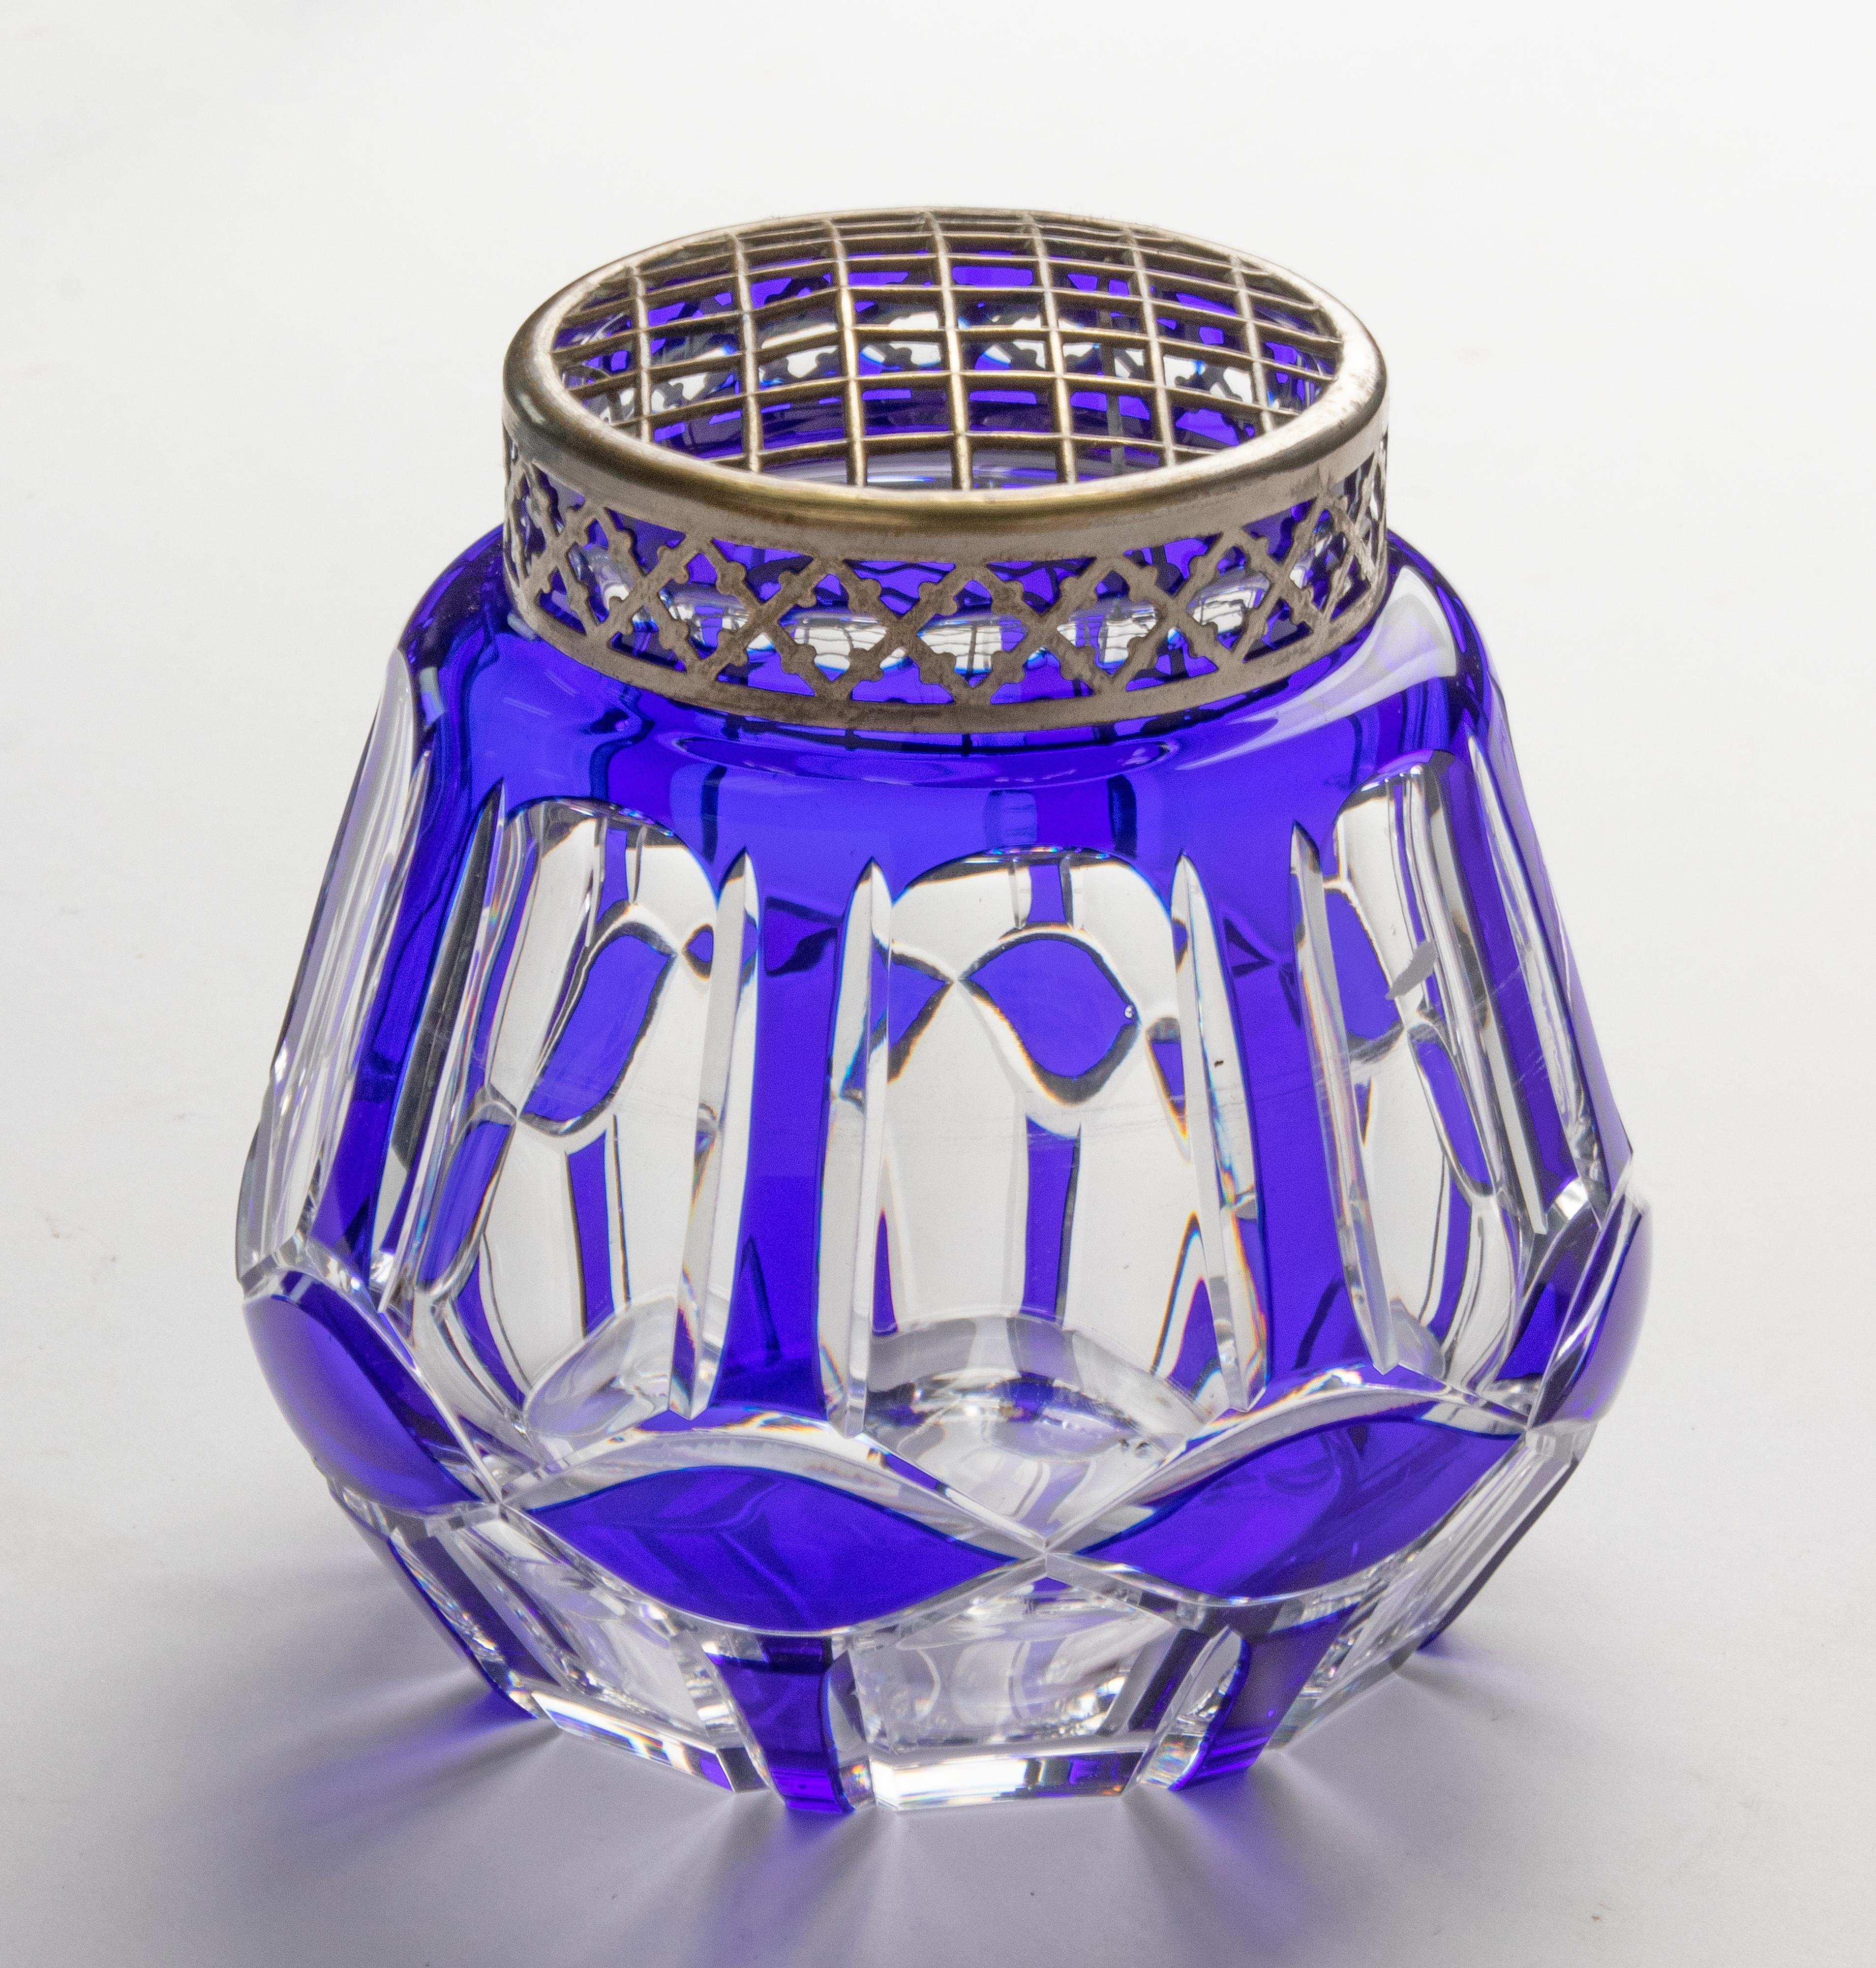 Large crystal Pick Fleur vase made by the Belgian brand Val Saint Lambert. The vase has a deep blue colour and on top a metal grill, to support stems in an arrangement. The body contains a good amount of water to keep the arrangement stabile and